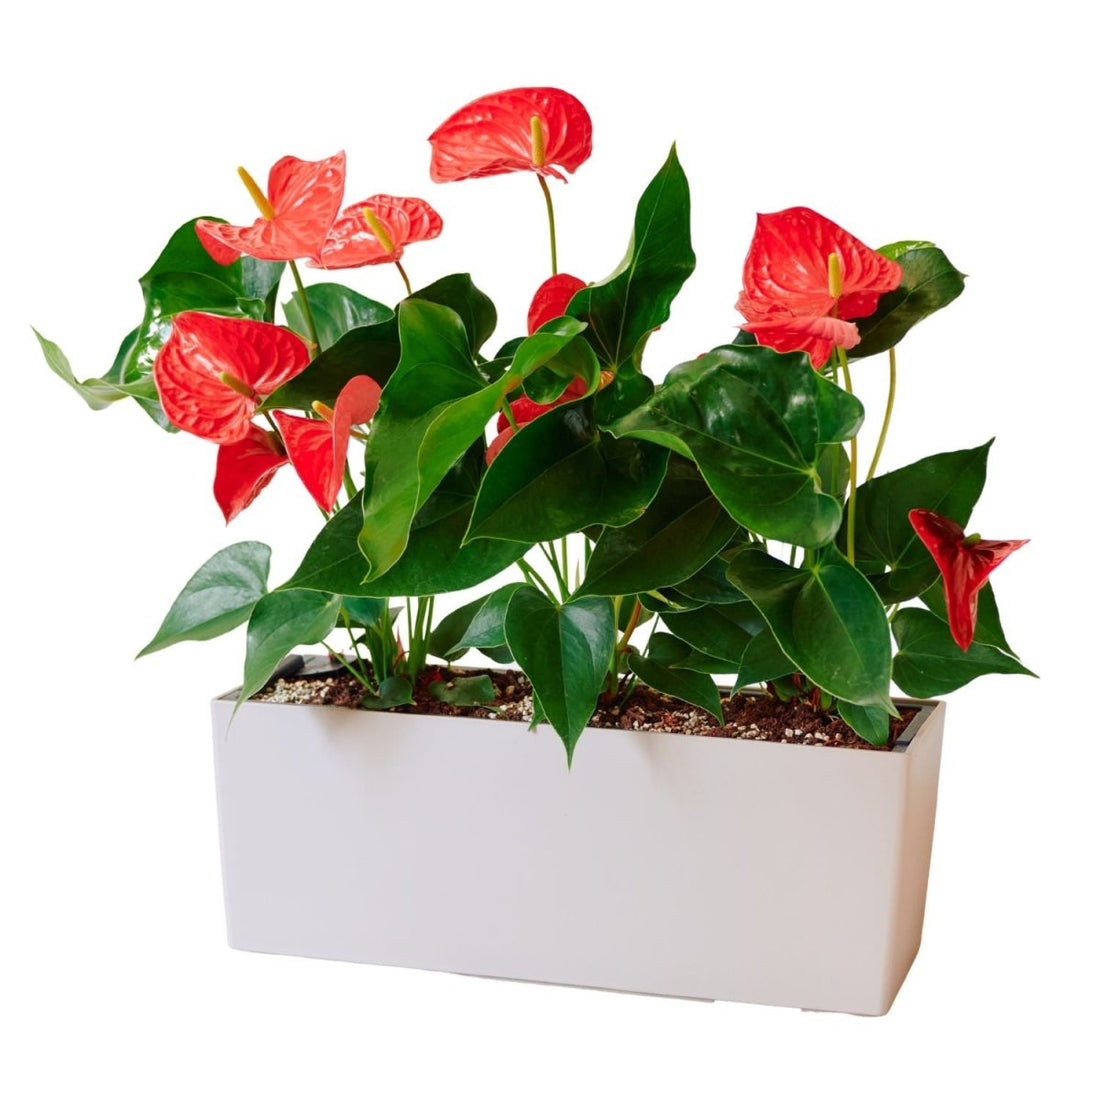 Anthurium Potted In Lechuza Balconera Planter - Sand Brown - My City Plants